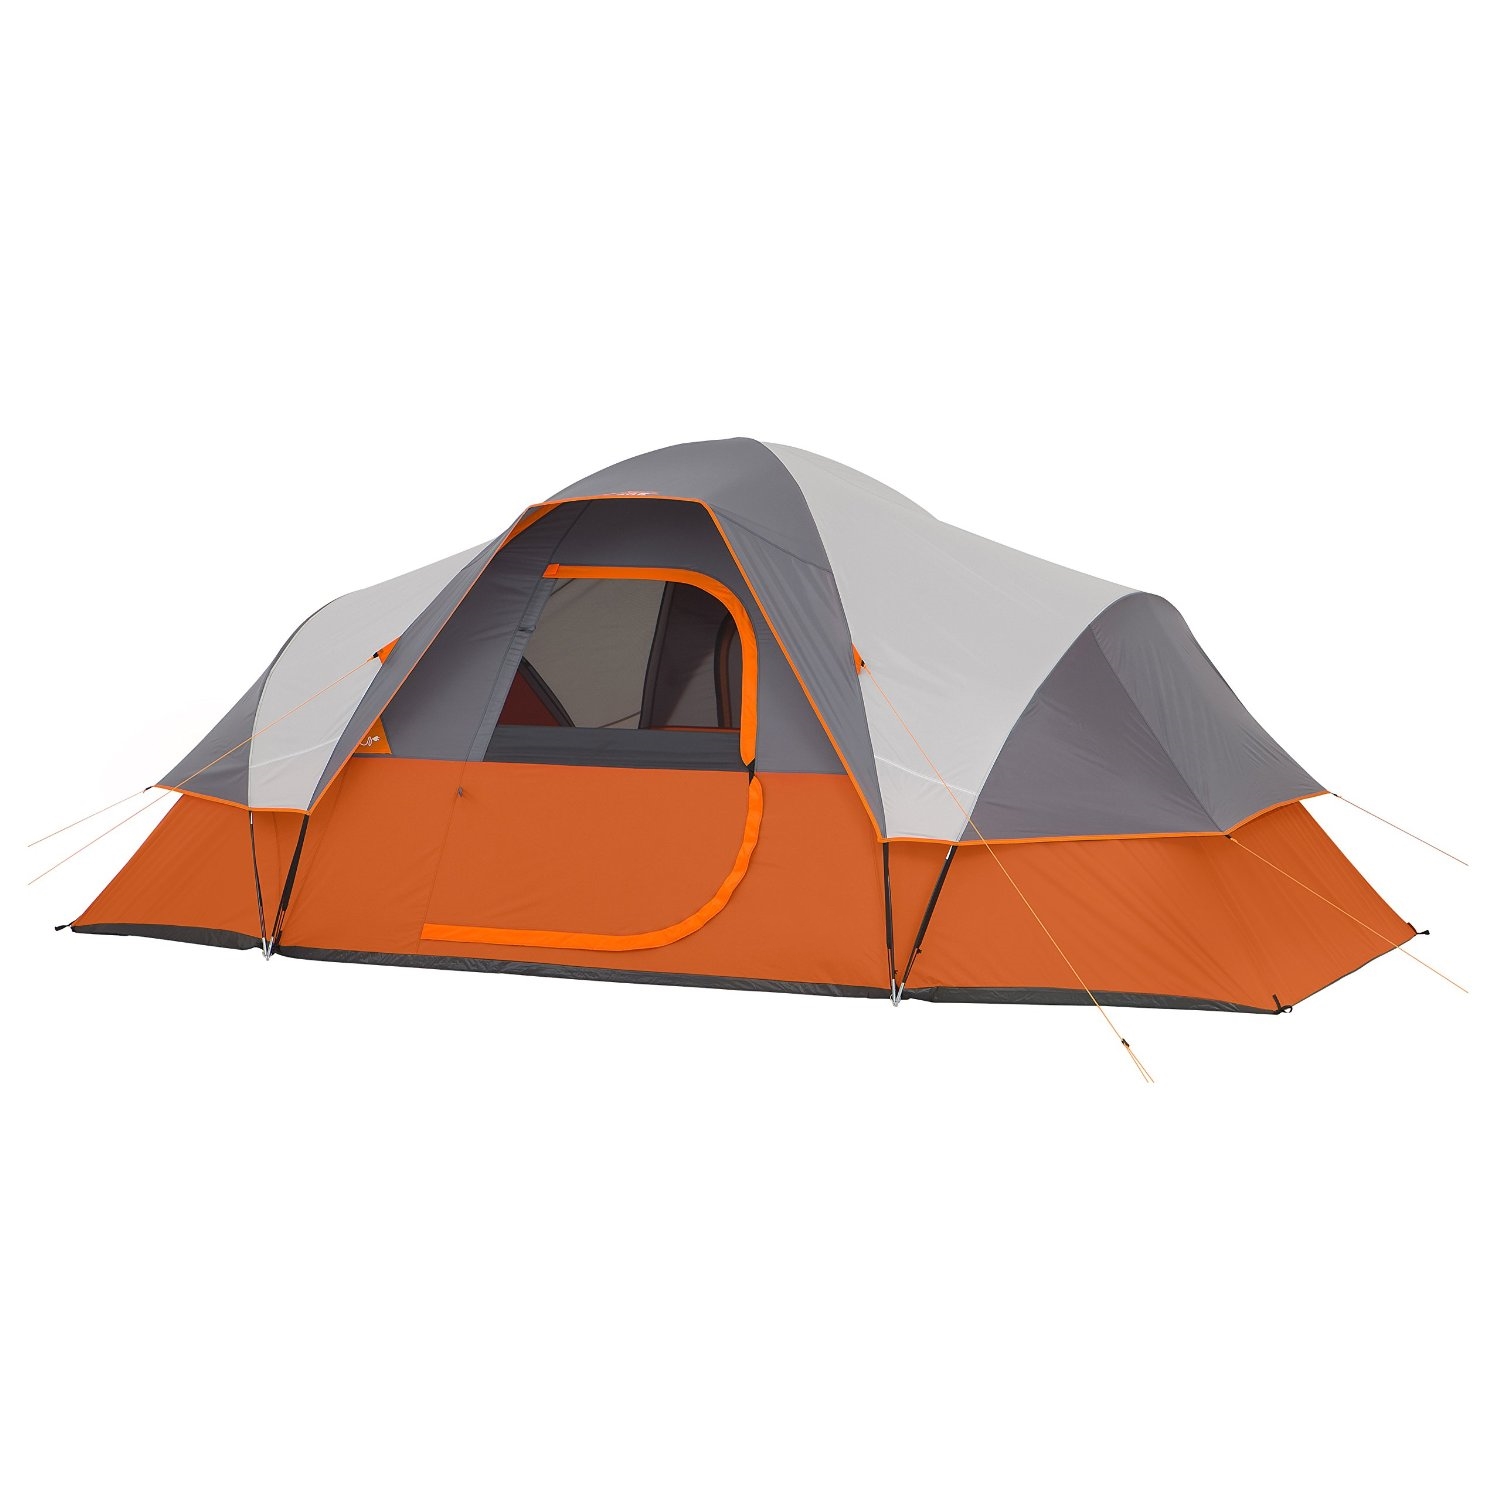 AIOIAI 9 Person Extended Dome Tent - 16' x 9' 